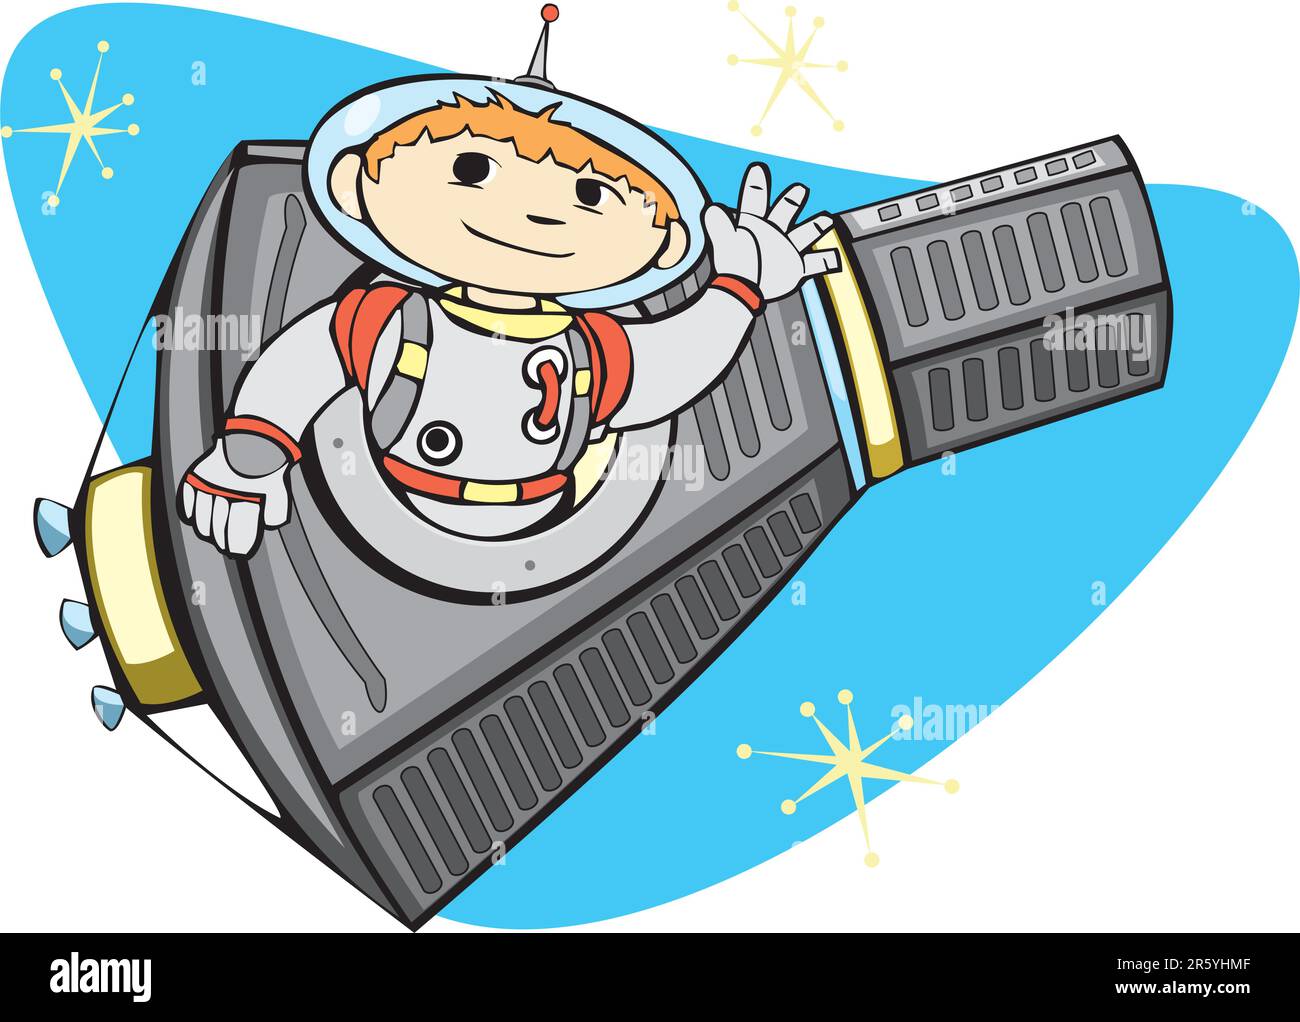 Retro Mercury Space Capsule with a boy in a spacesuit. Stock Vector